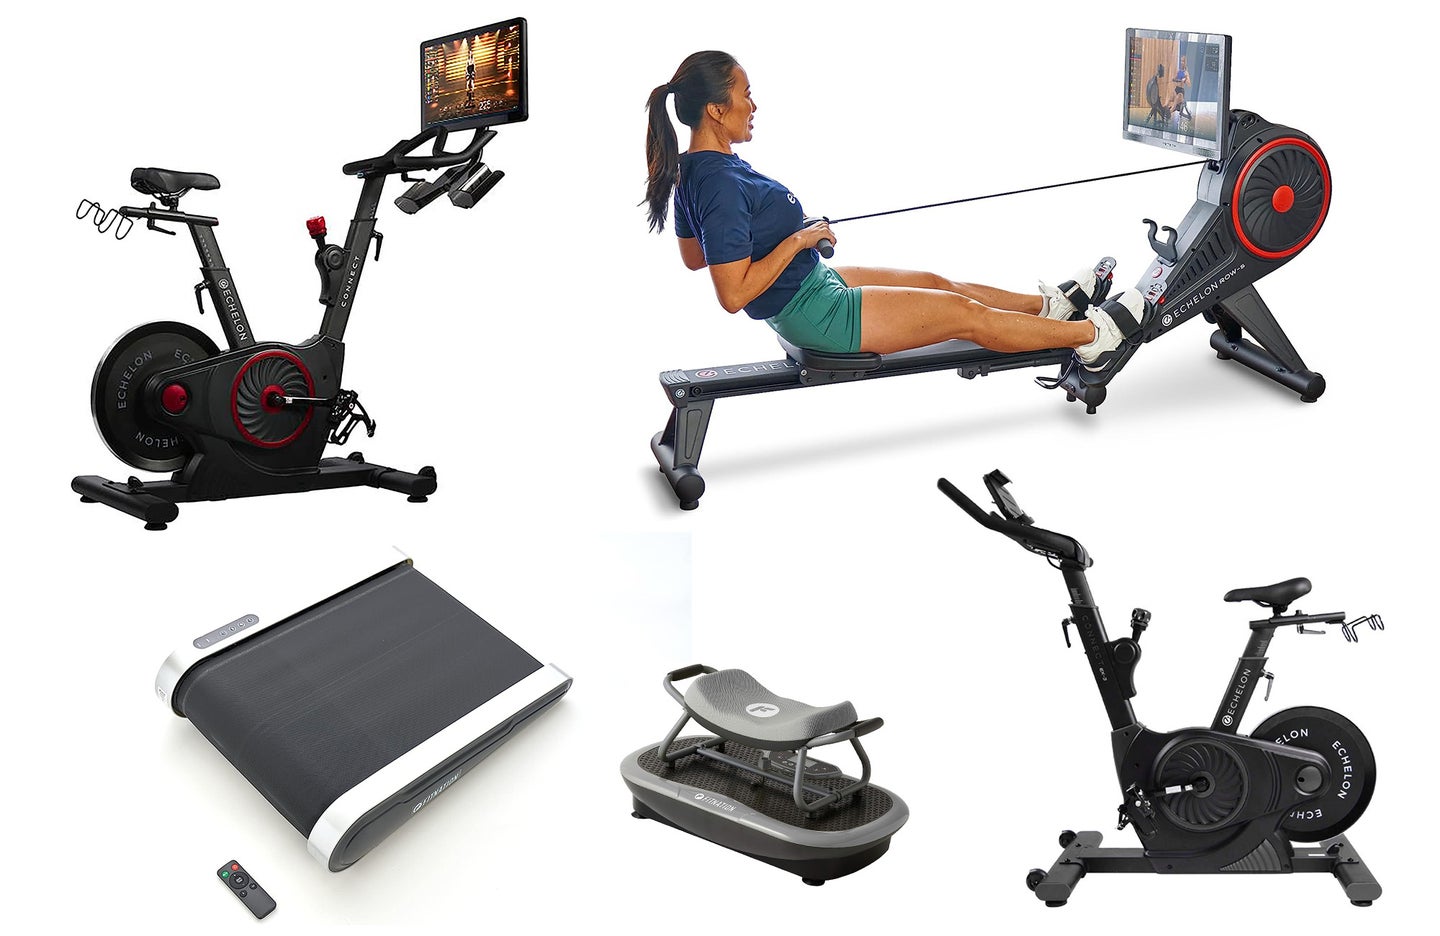 Save hundreds on smart fitness equipment from Echelon this Amazon Prime Day.